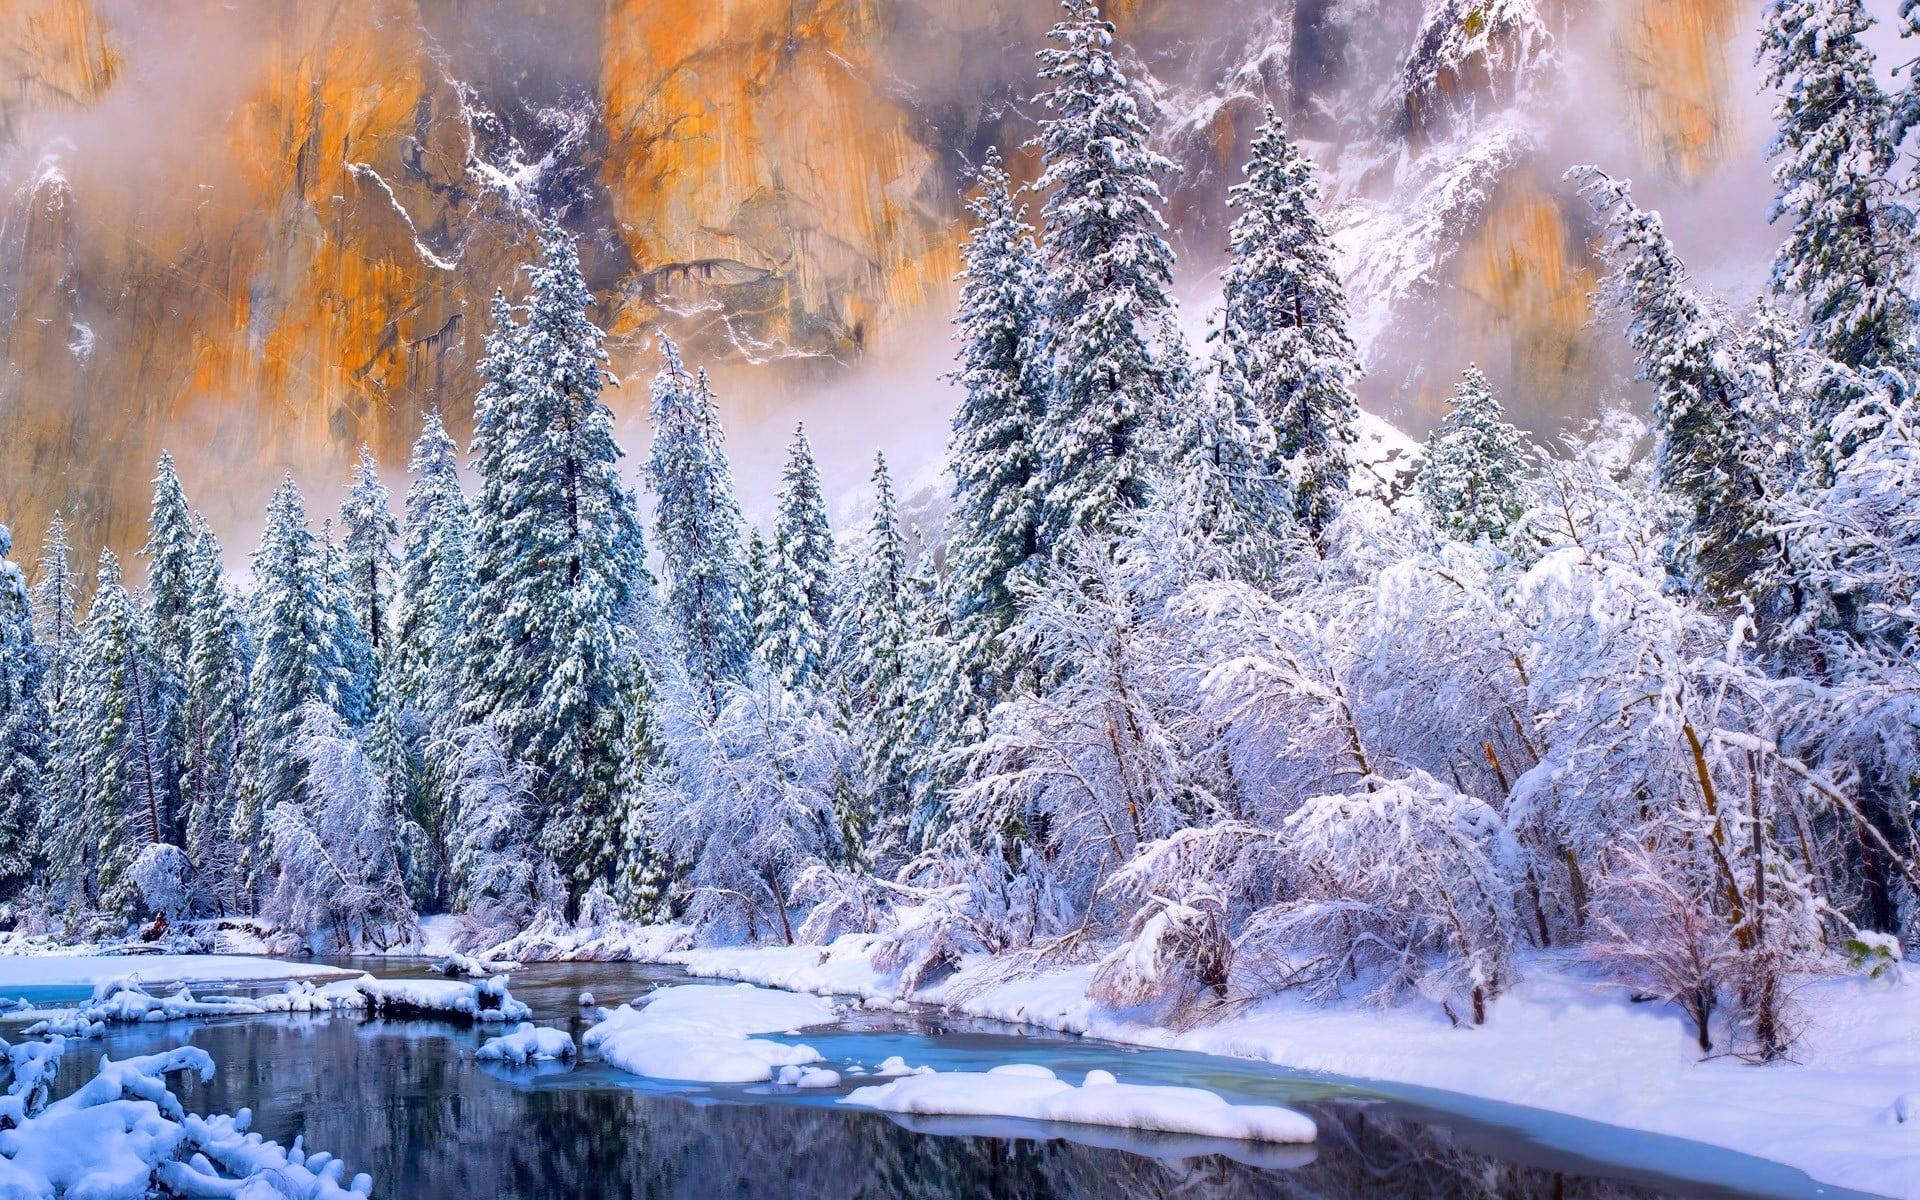 Artwork of landscape covered with snow, winter, Yosemite